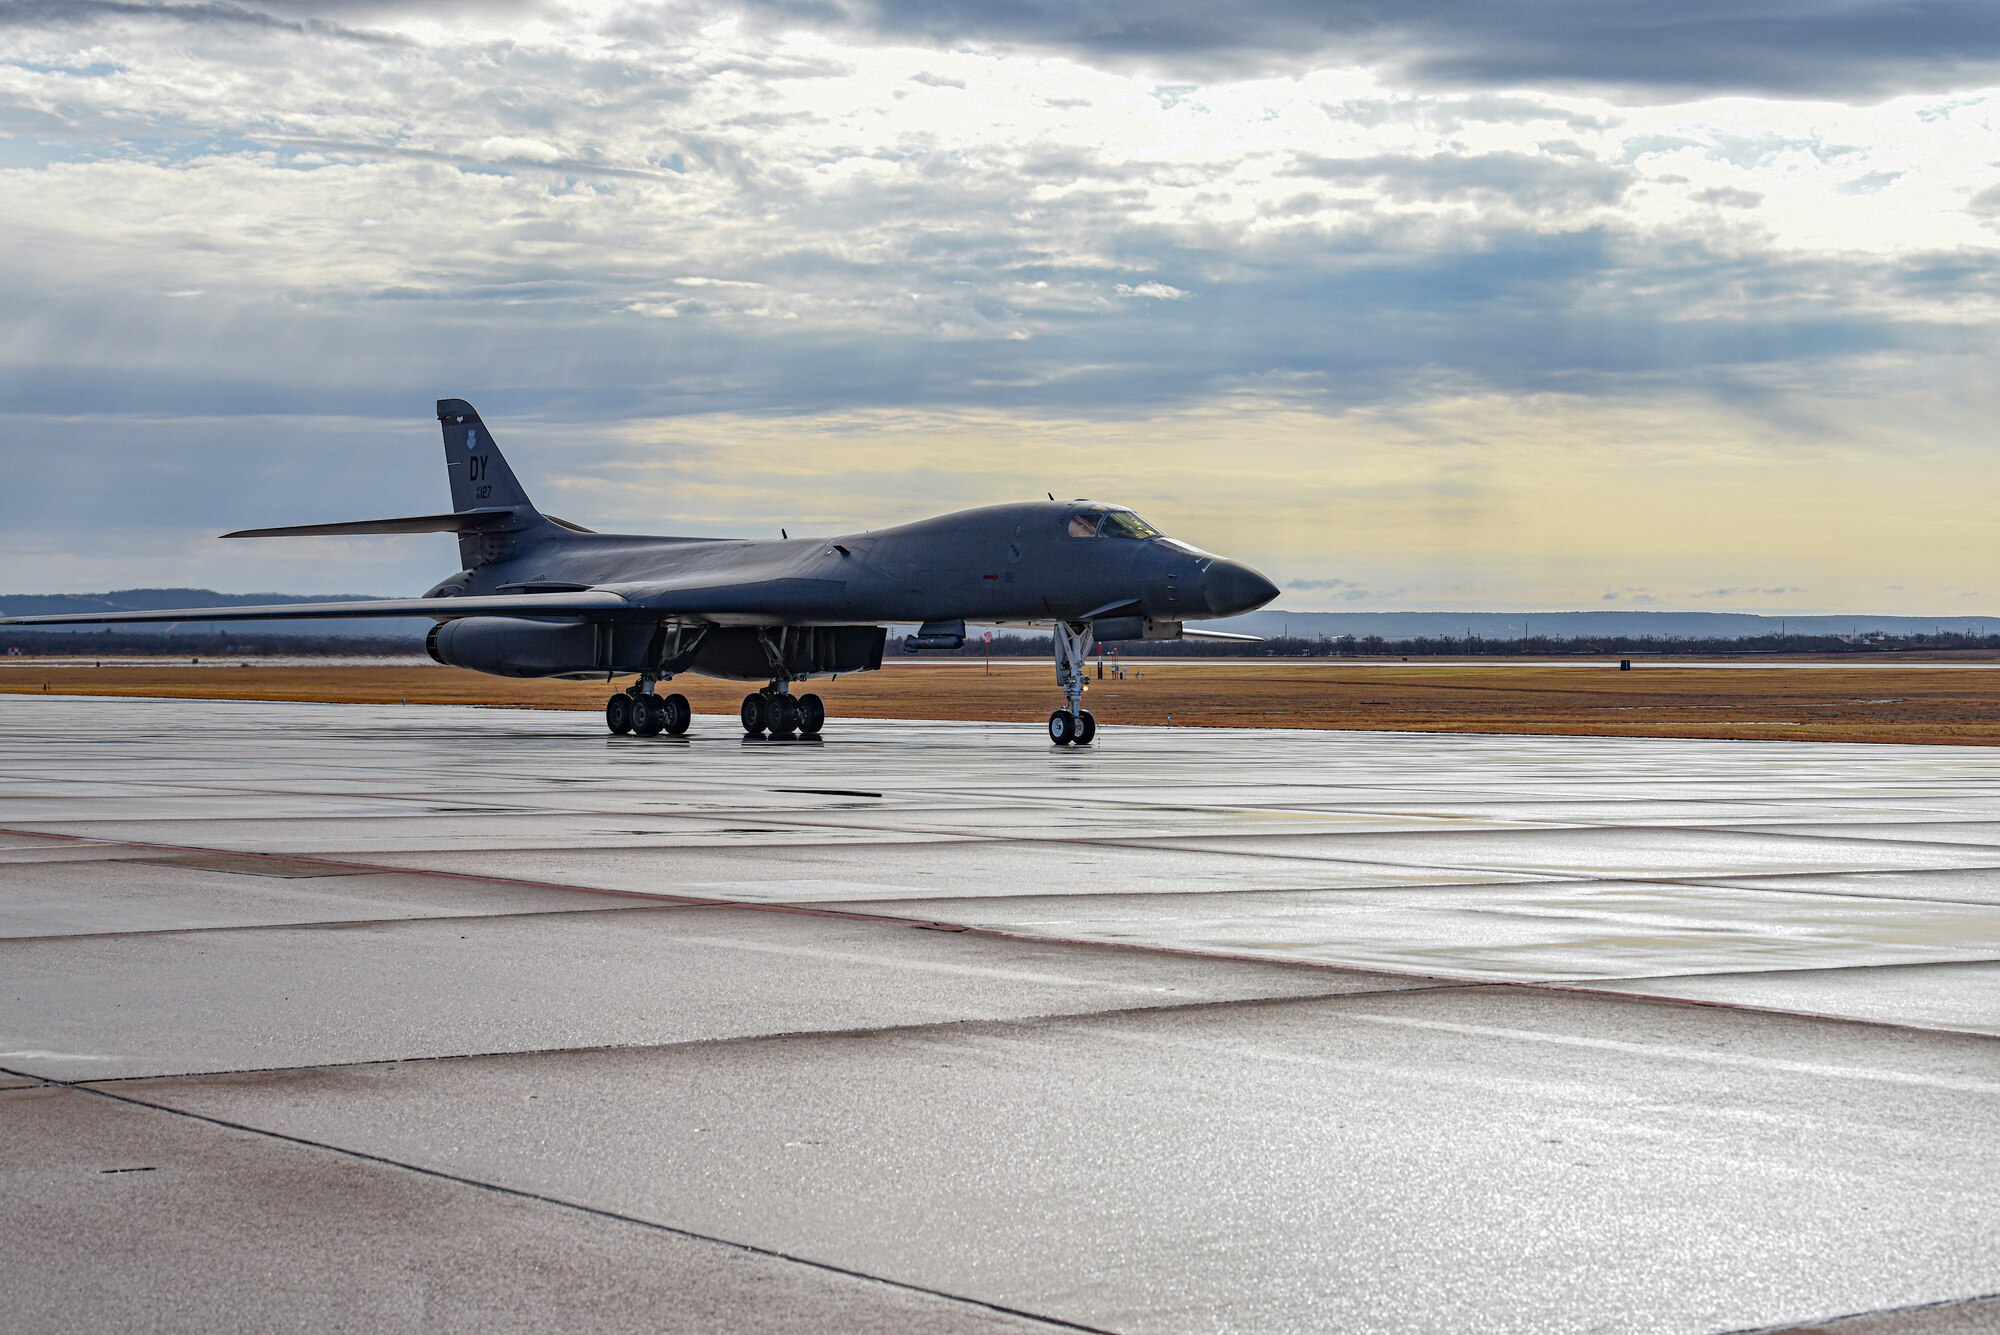 A B-1B Lancer lands after completing a Continental United States to Continental United States joint Large Force Exercise with the Japanese Air Self-Defense Force at Dyess Air Force Base, Texas, Jan. 11, 2022. The exercise is a clear message showing the U.S. commitment to our allies and partners within the Indo-Pacific region. (U.S. Air Force photo by Airman 1st Class Ryan Hayman)